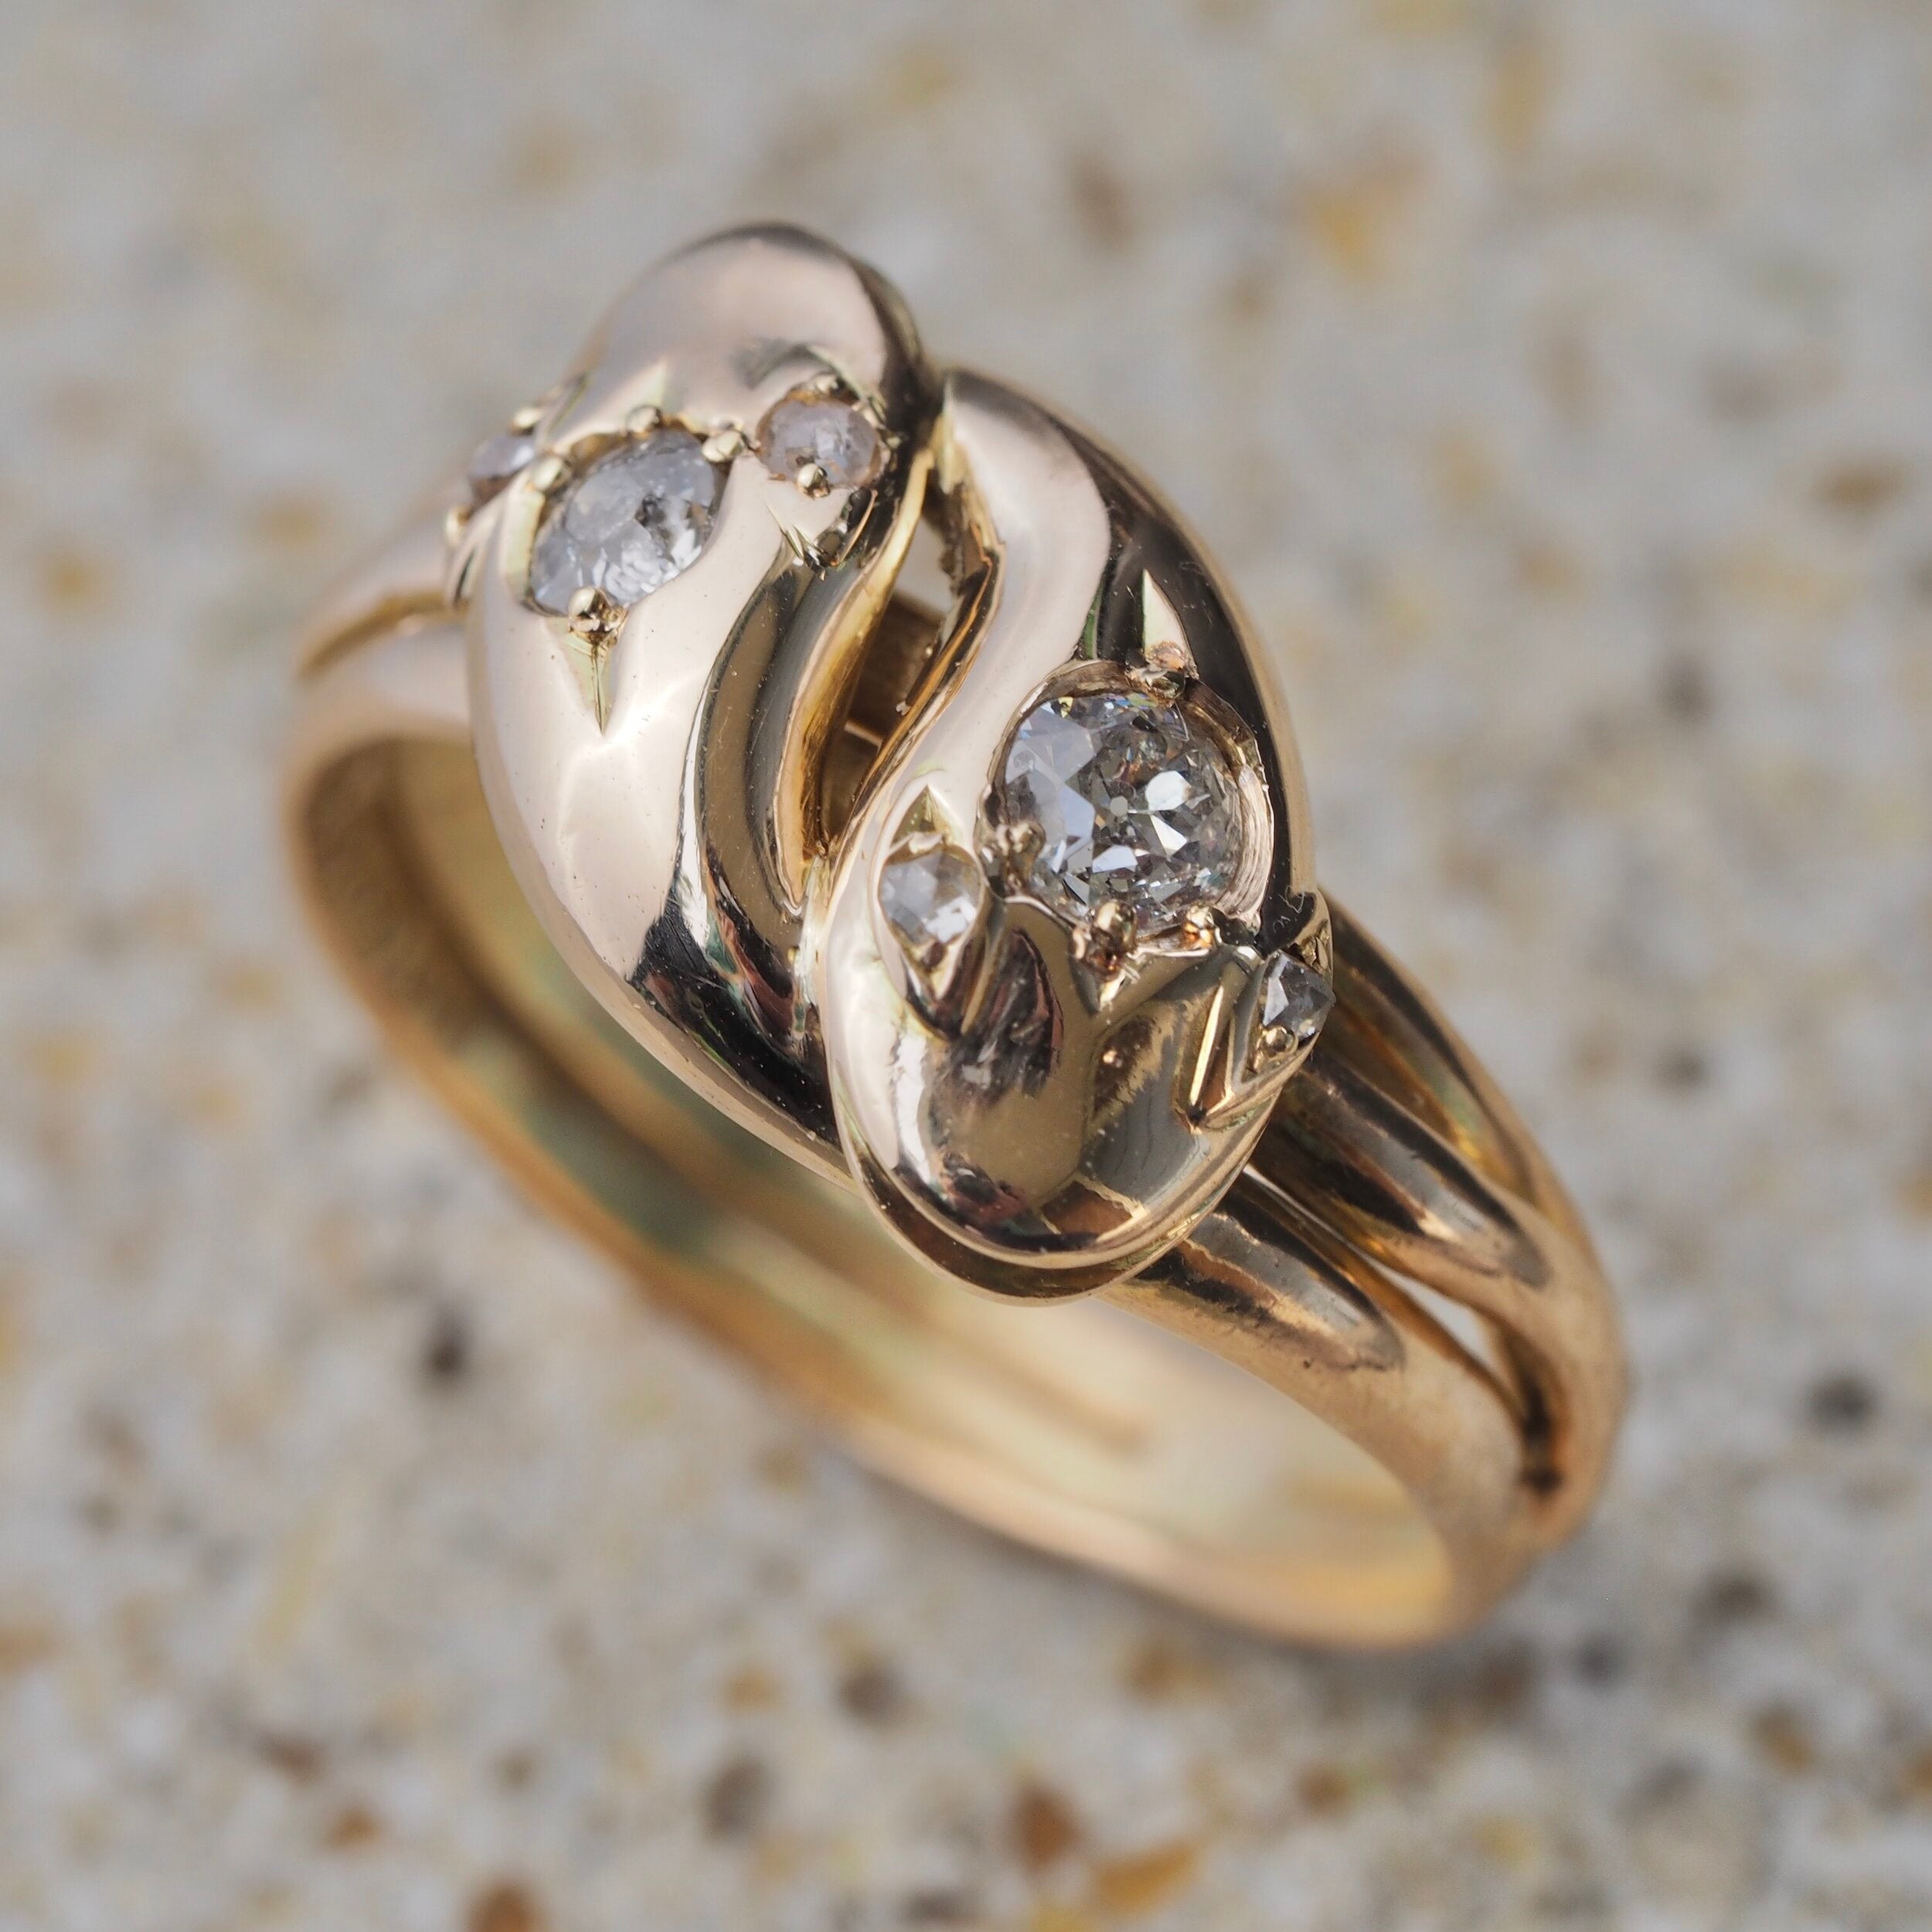 Antique Victorian c. 1890 15k Gold Old Mine Cut Diamond Double Snake Ring